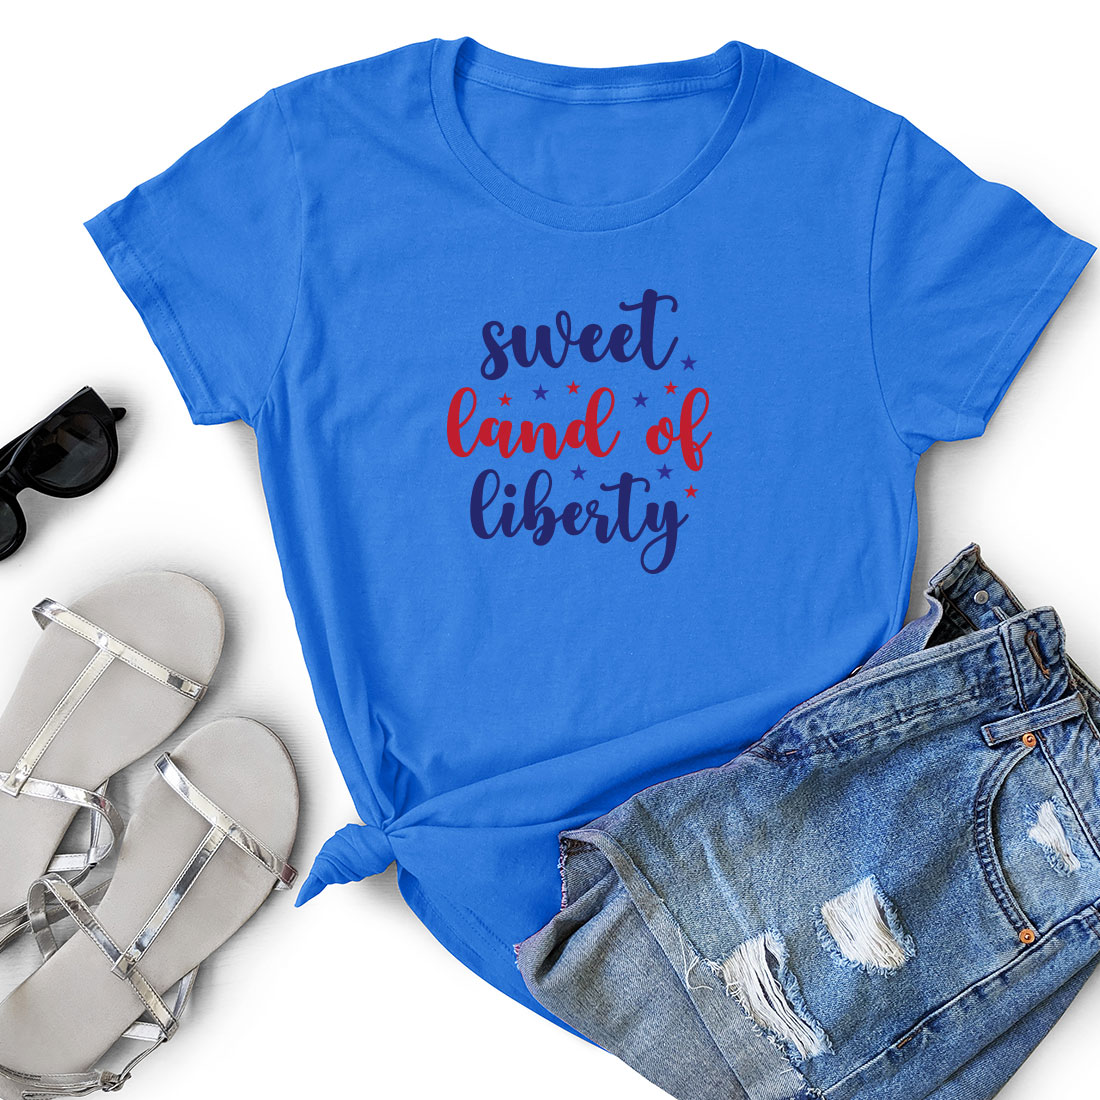 T - shirt that says sweet candy and a pair of shorts.